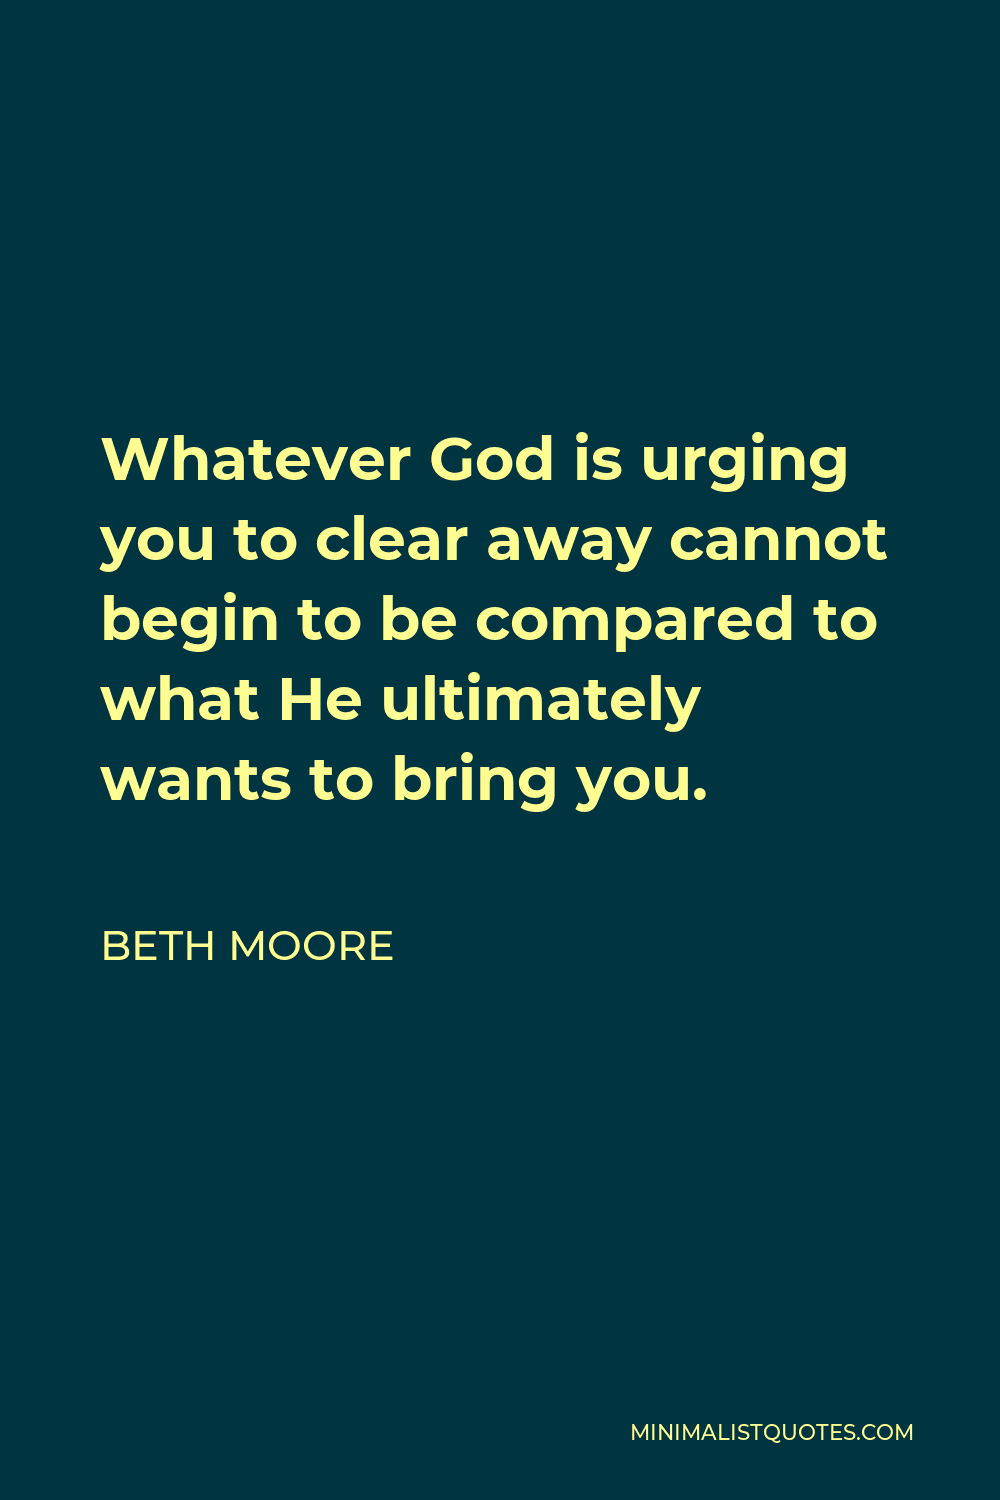 Beth Moore Quote - Whatever God is urging you to clear away cannot begin to be compared to what He ultimately wants to bring you.